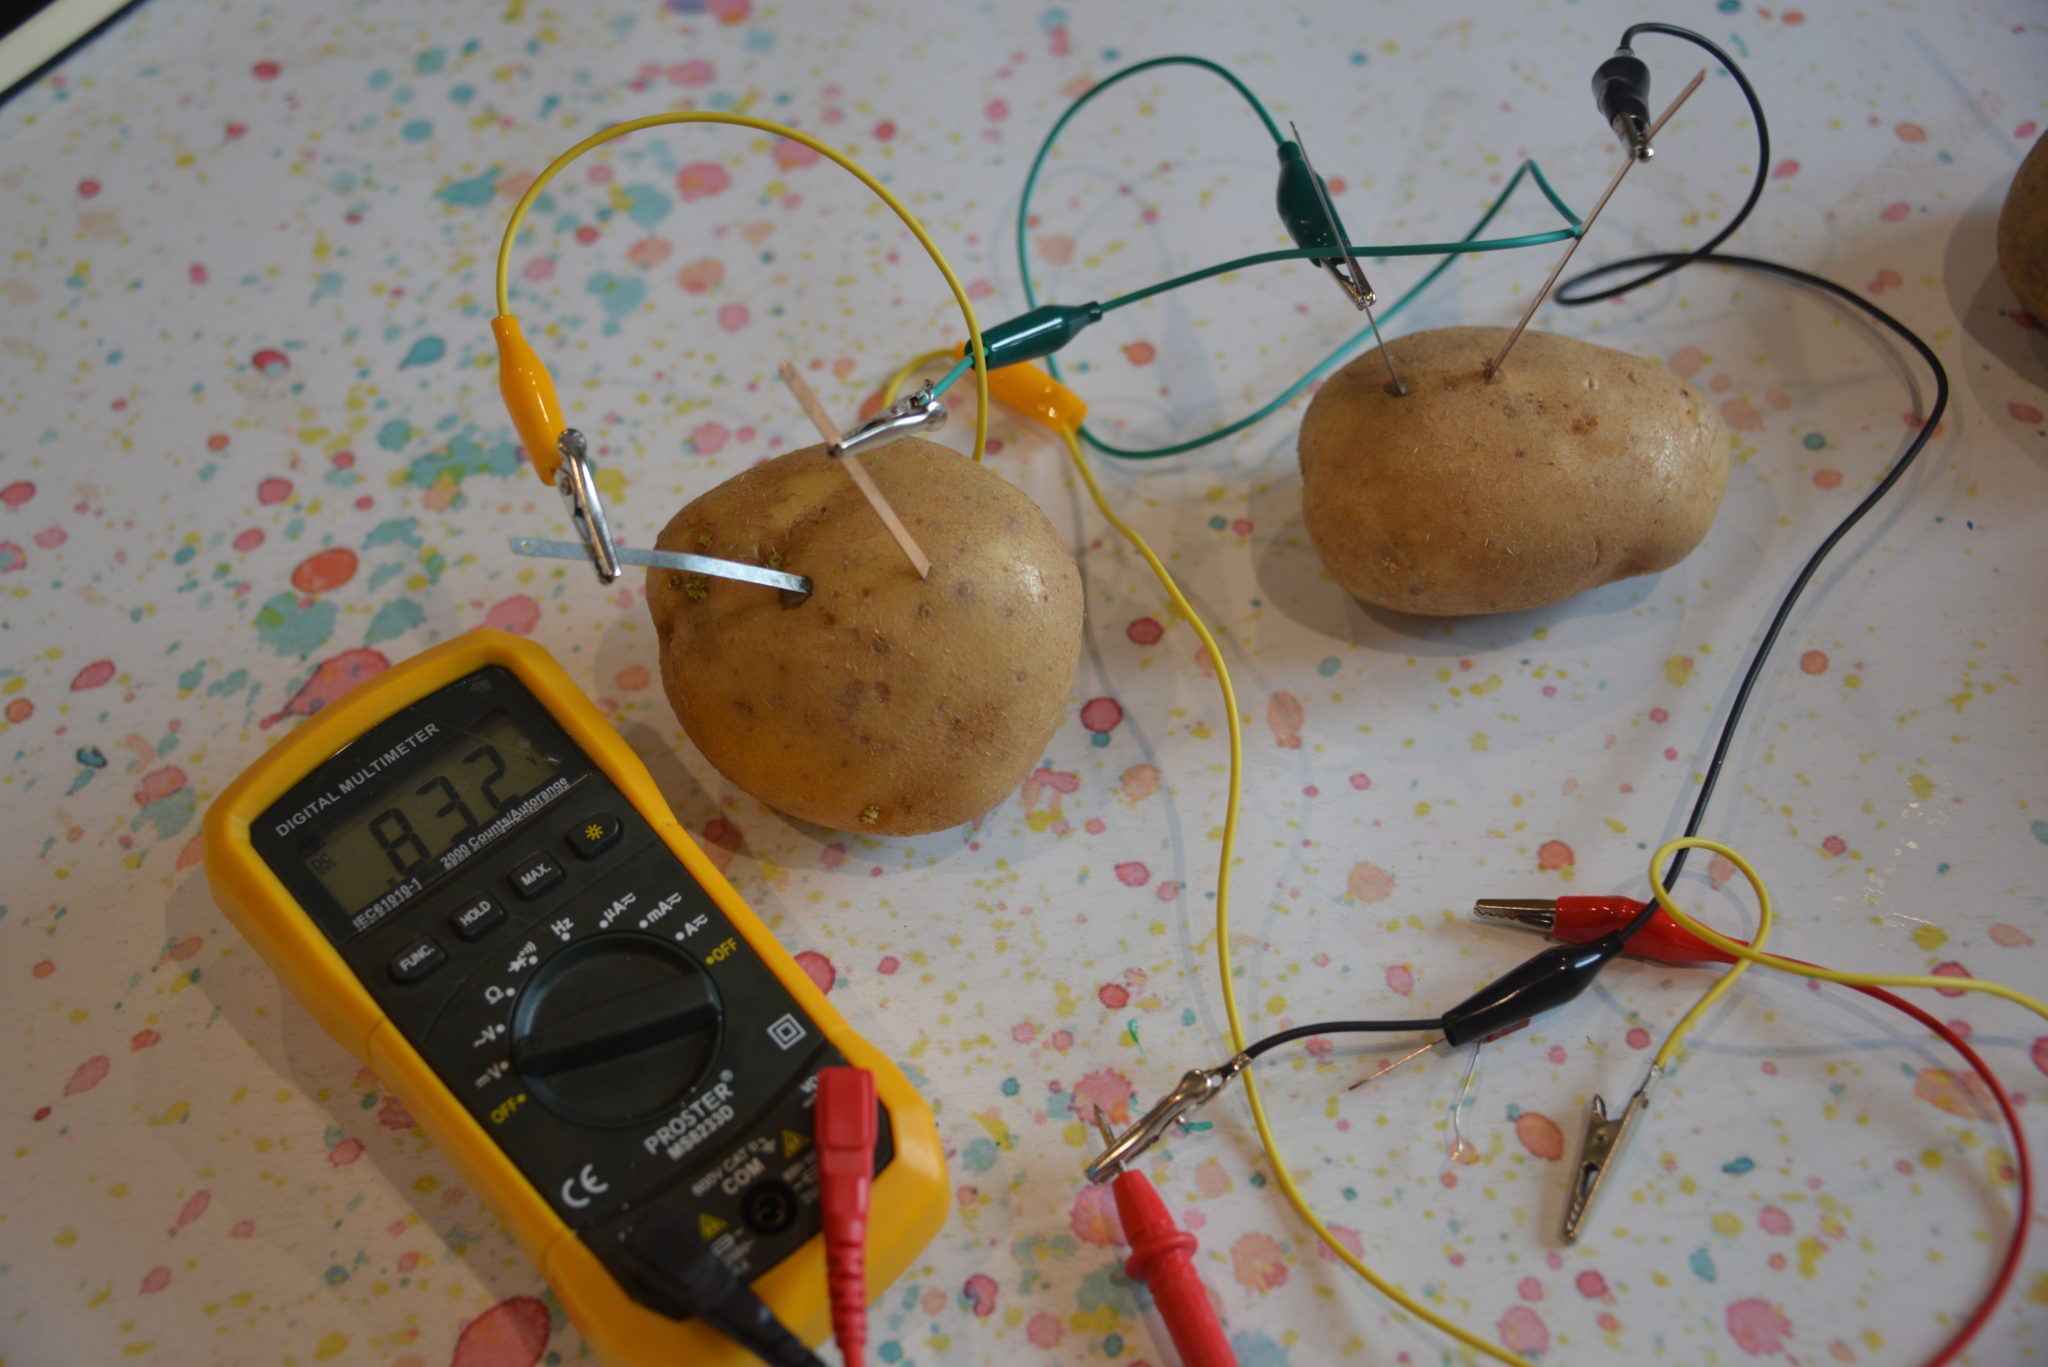 2 potatoes and a voltmeter showing the current passing through the potato battery circuit